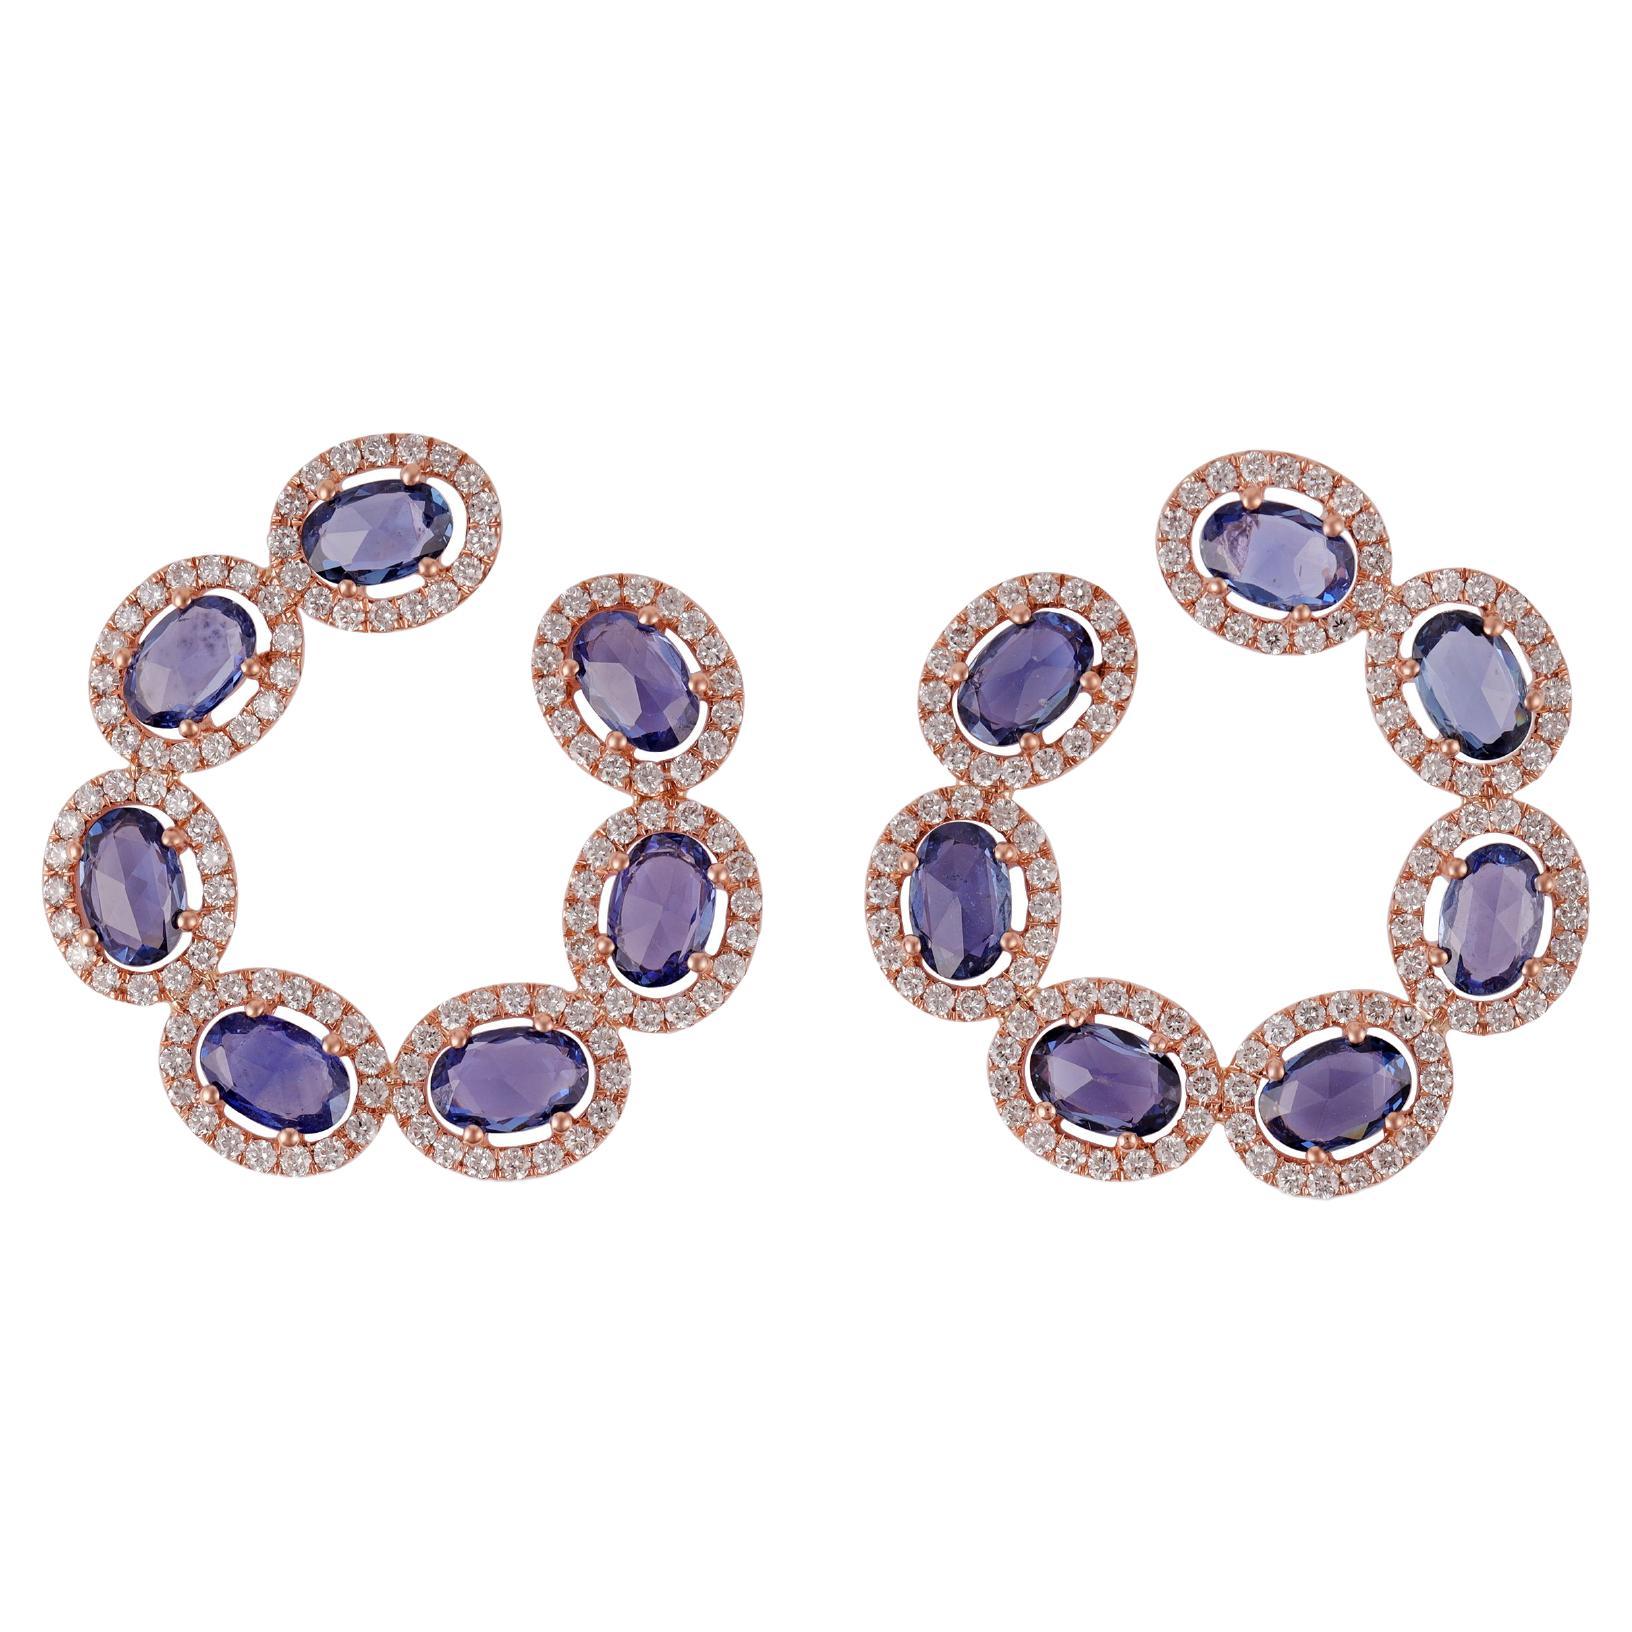 6.25 Carat  Blue Sapphire Earrings in Rose Gold with Diamonds.  For Sale